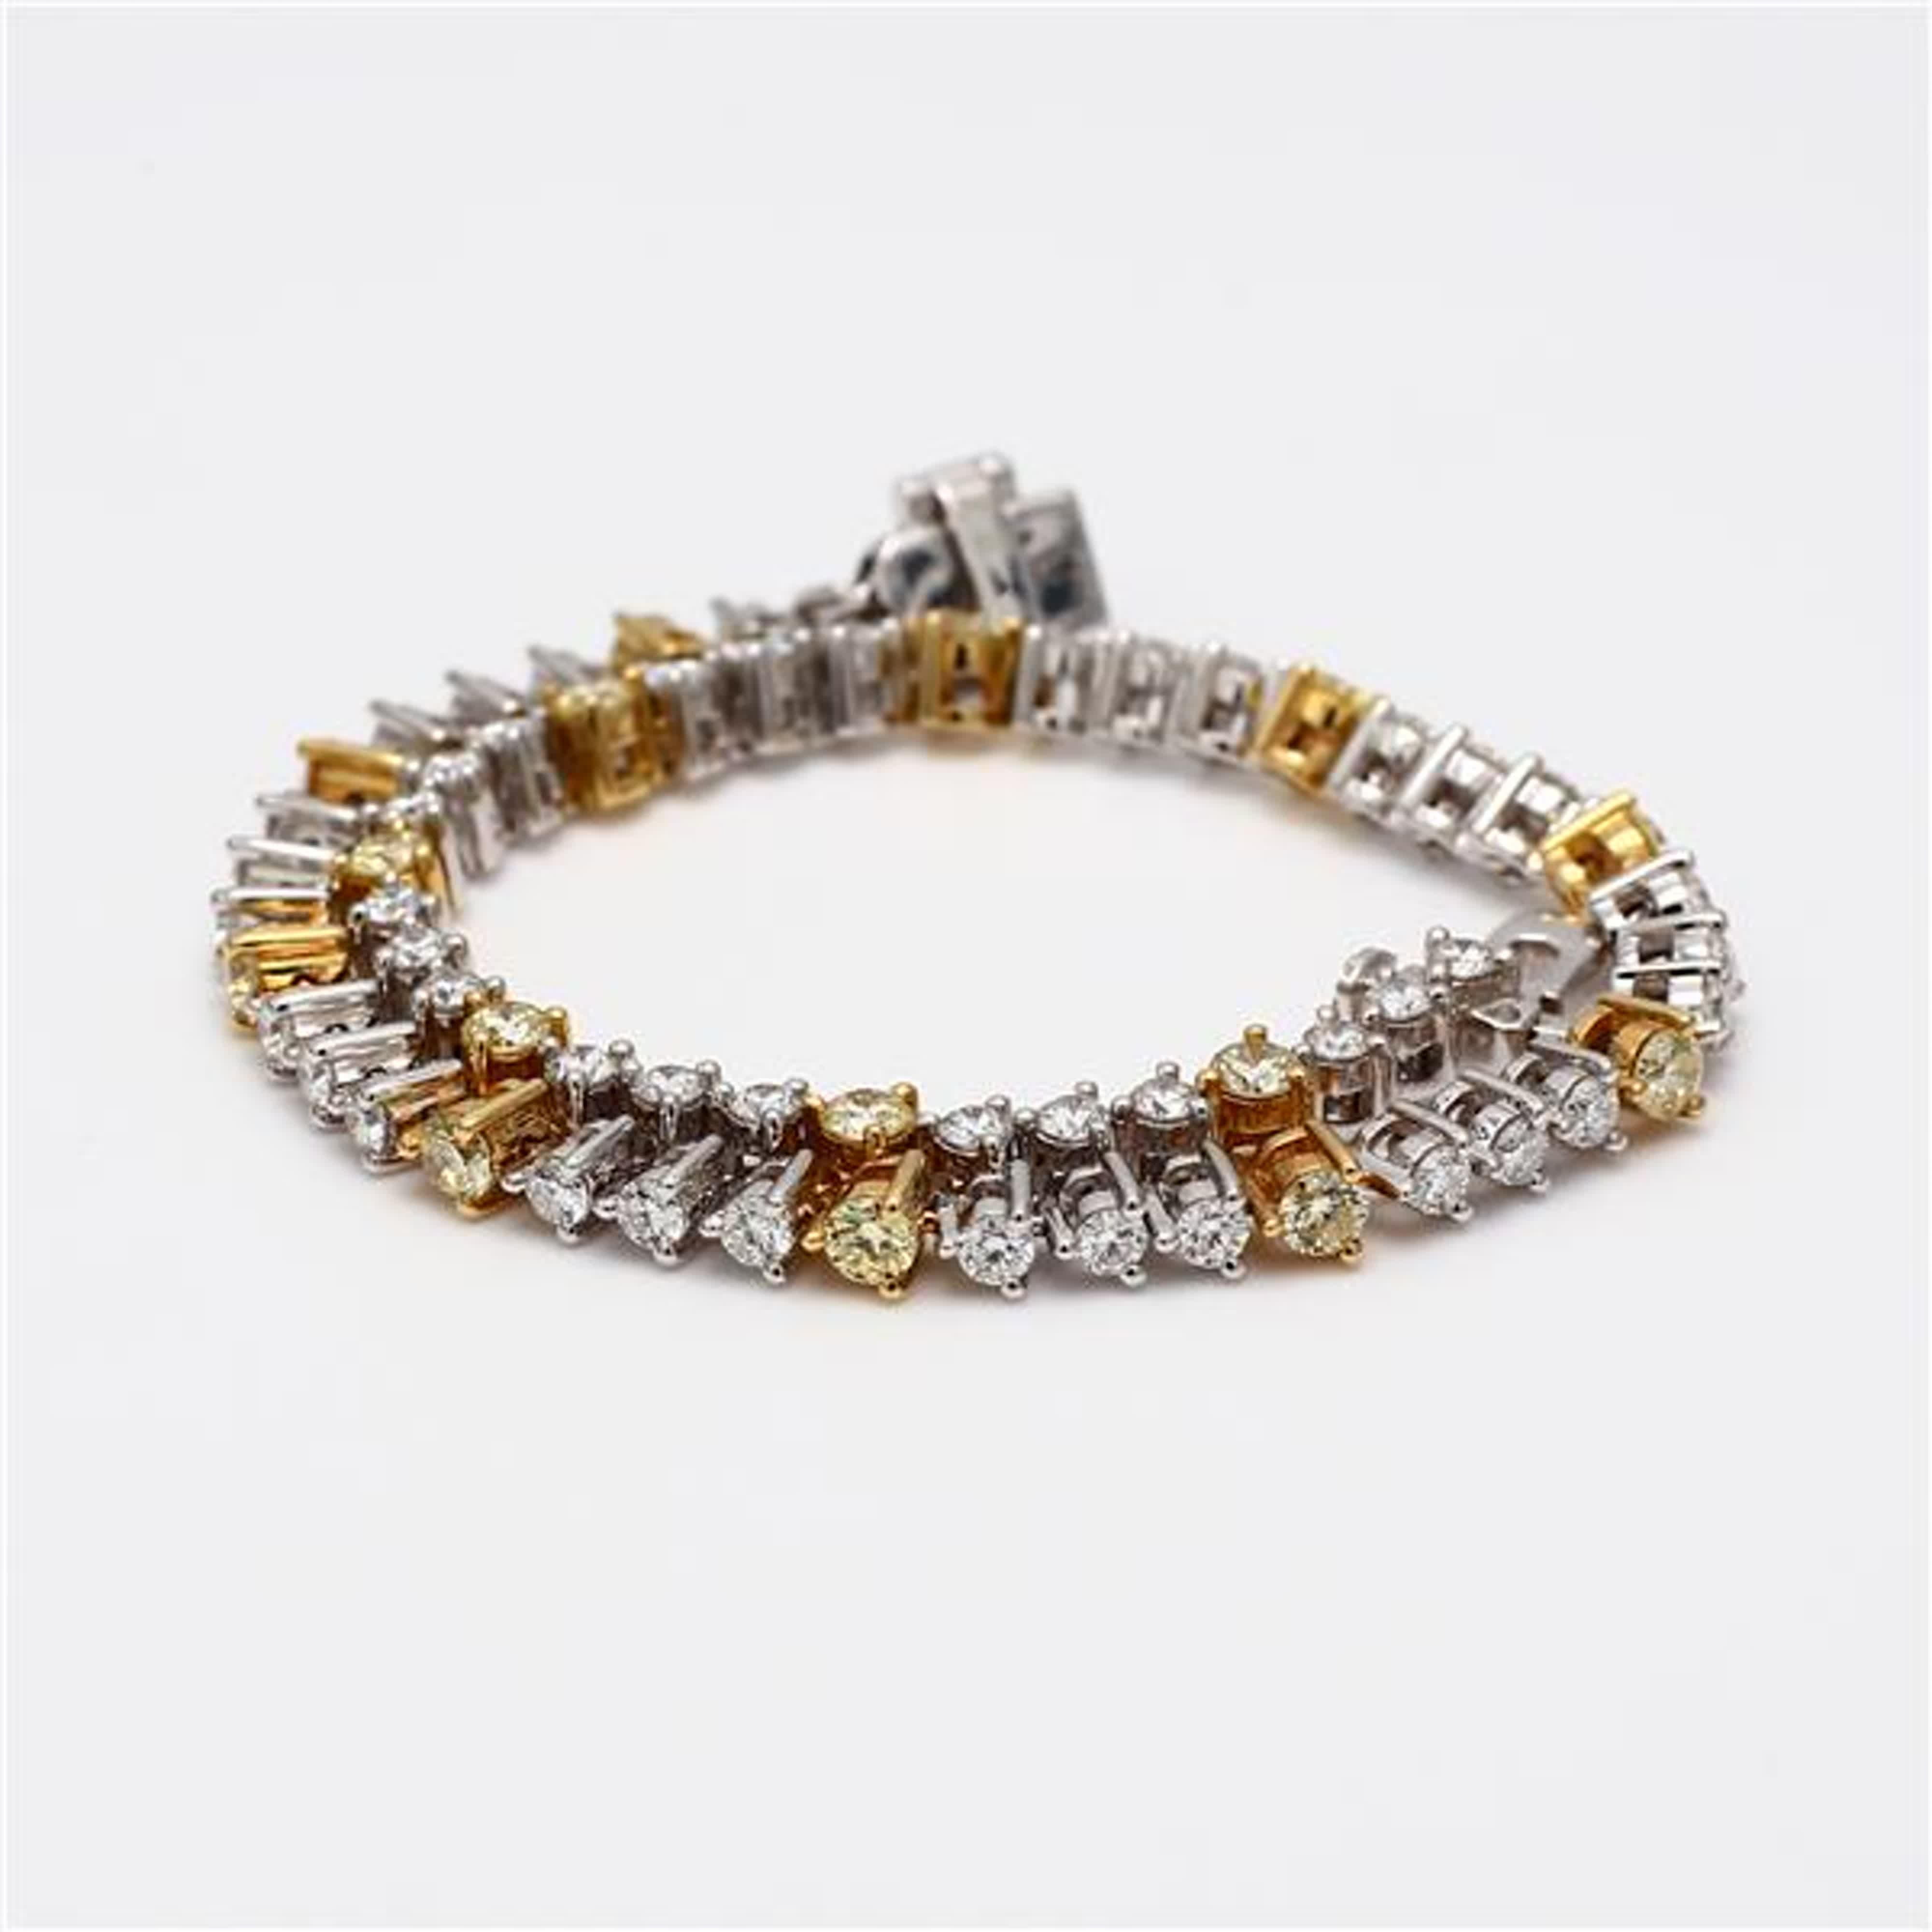 RareGemWorld's classic natural round cut yellow diamond bracelet. Mounted in a beautiful 14K Yellow and White Gold setting with 10 natural round cut yellow diamonds. The yellow diamonds are surrounded by small round natural white diamond melee. This